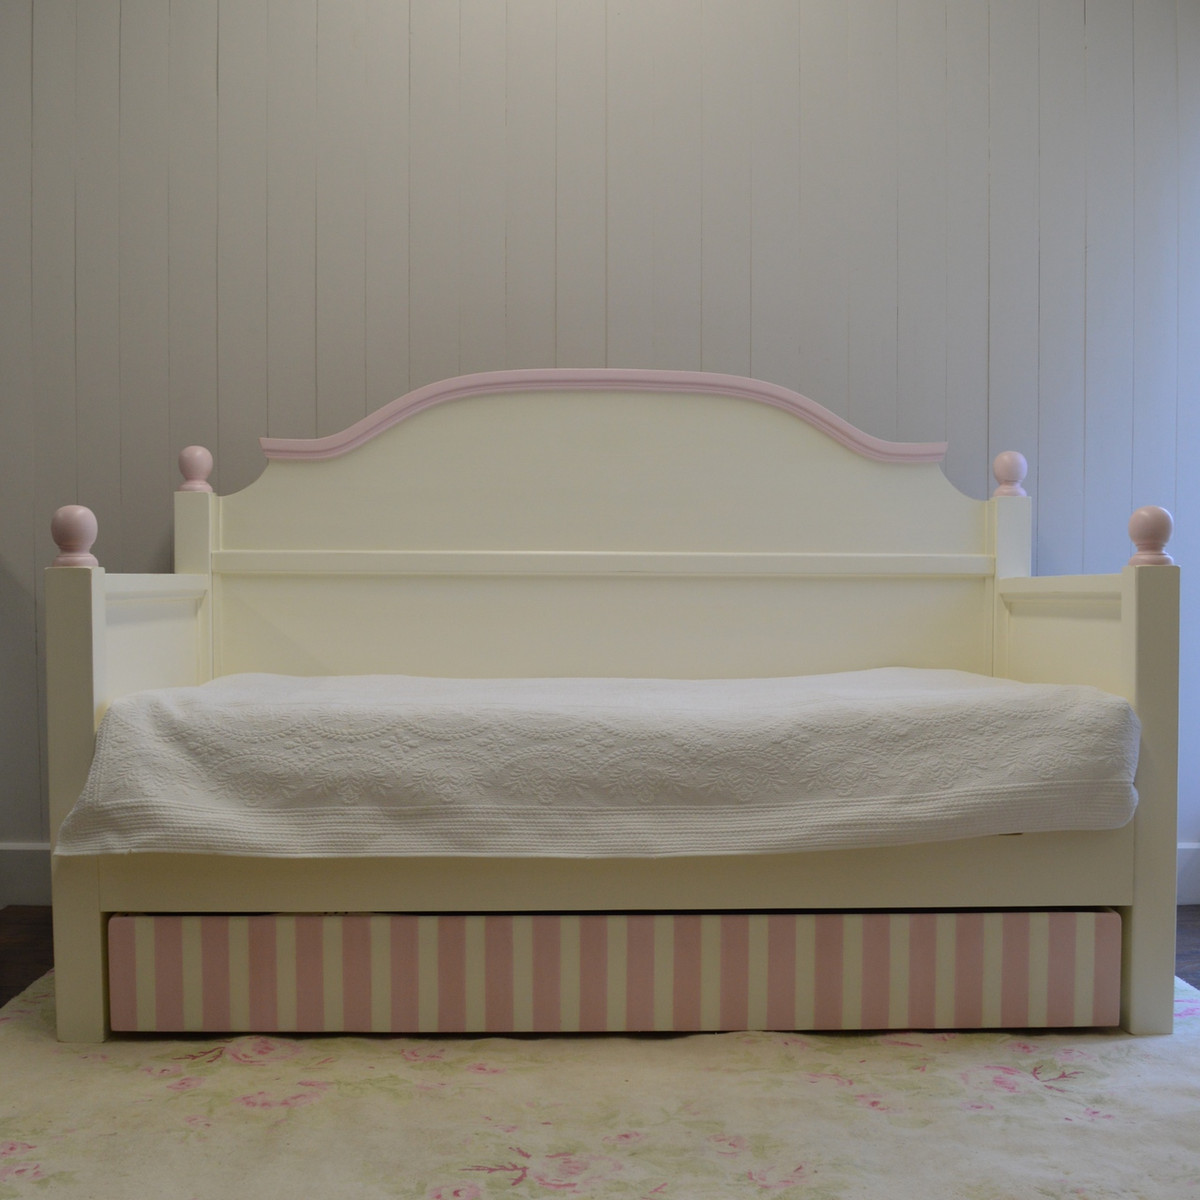 French Farm Daybed with Trundle- french white with pink